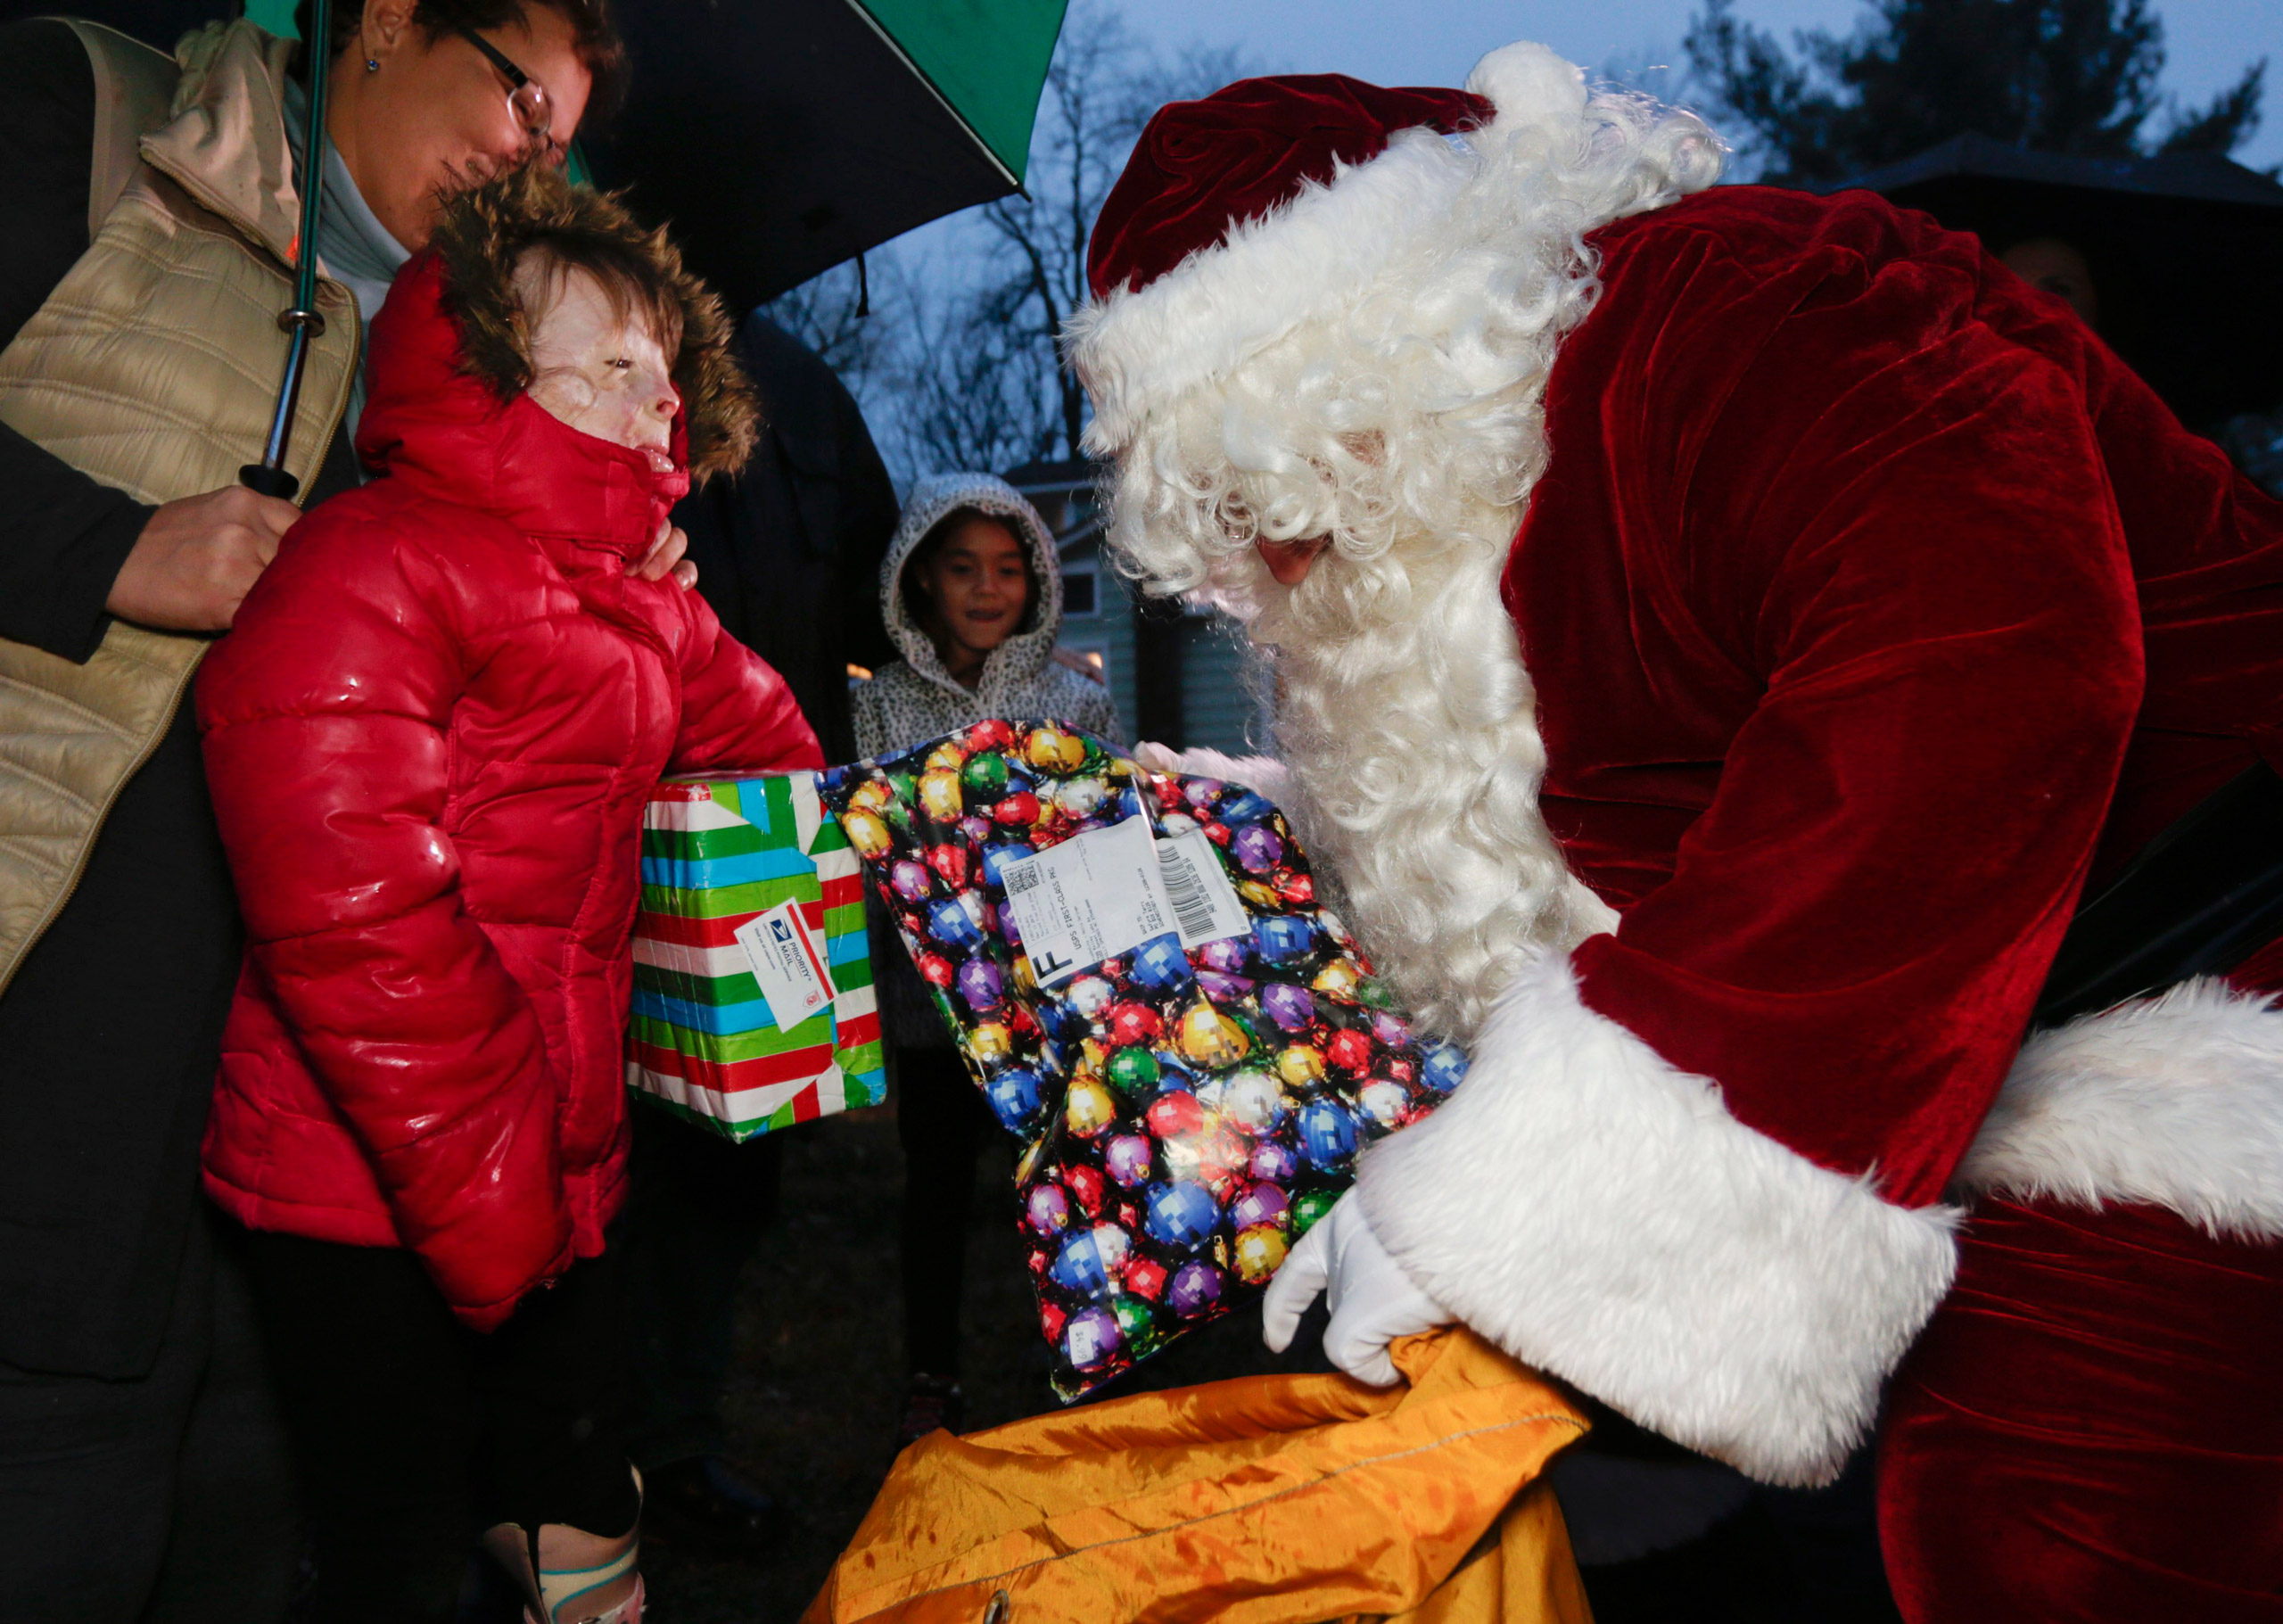 Safyre Terry receives packages from Santa Claus in Rotterdam, N.Y., on Dec. 17, 2015. (Mike Groll—AP)